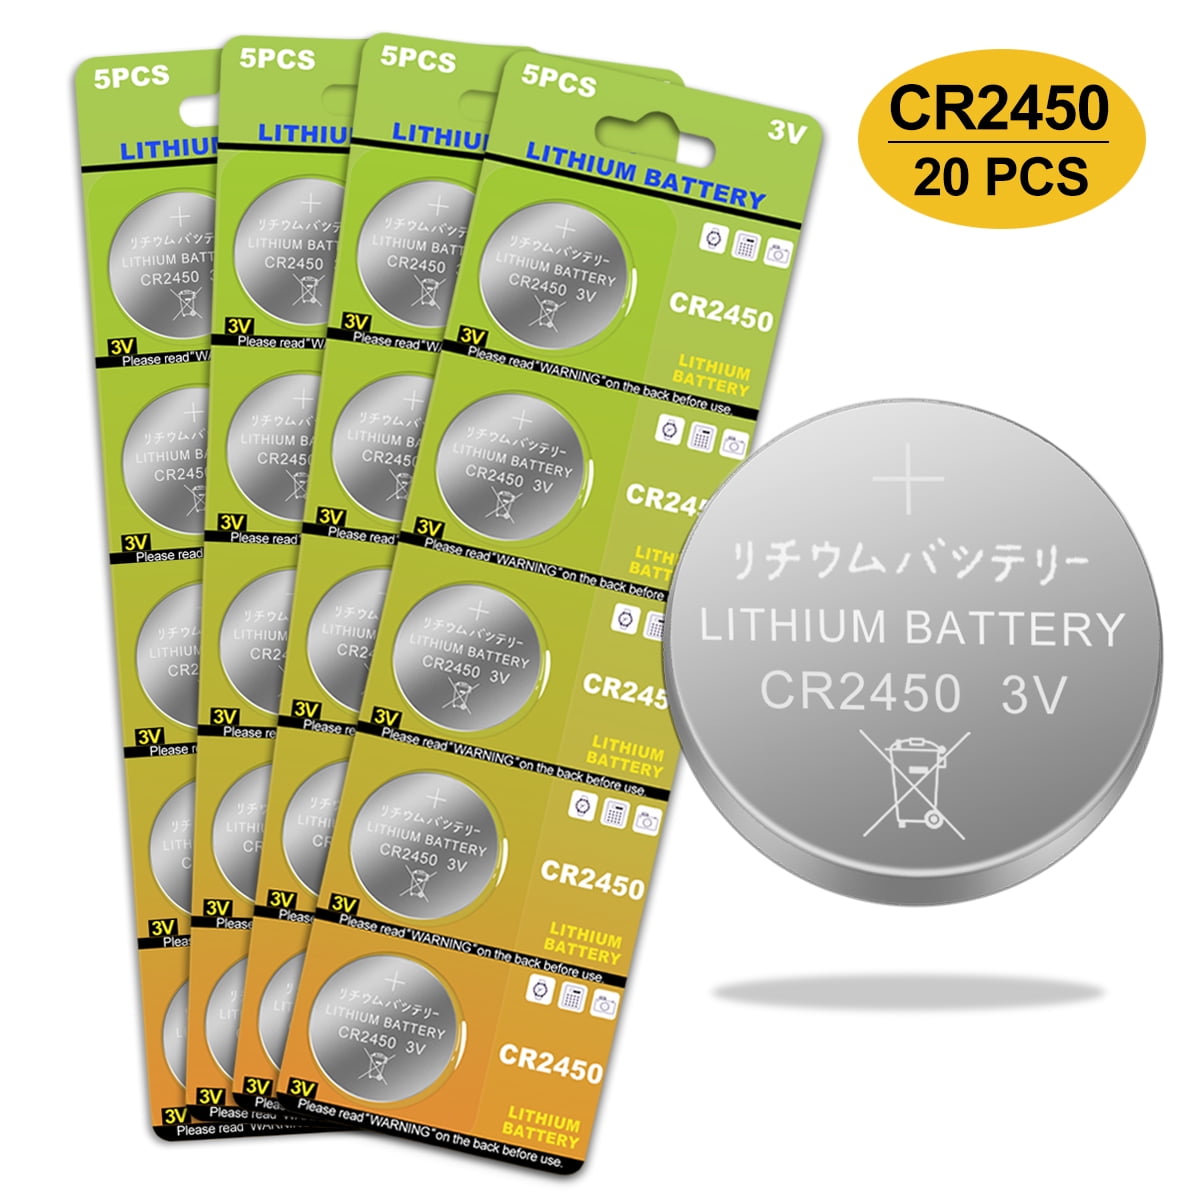 CR2450 Battery 3v Lithium Coin Cell Batteries - High Capacity 700mAh Button  Cell Battery for Flameless Tea Light Candles, Remote, Window Sensor 36 Pack  